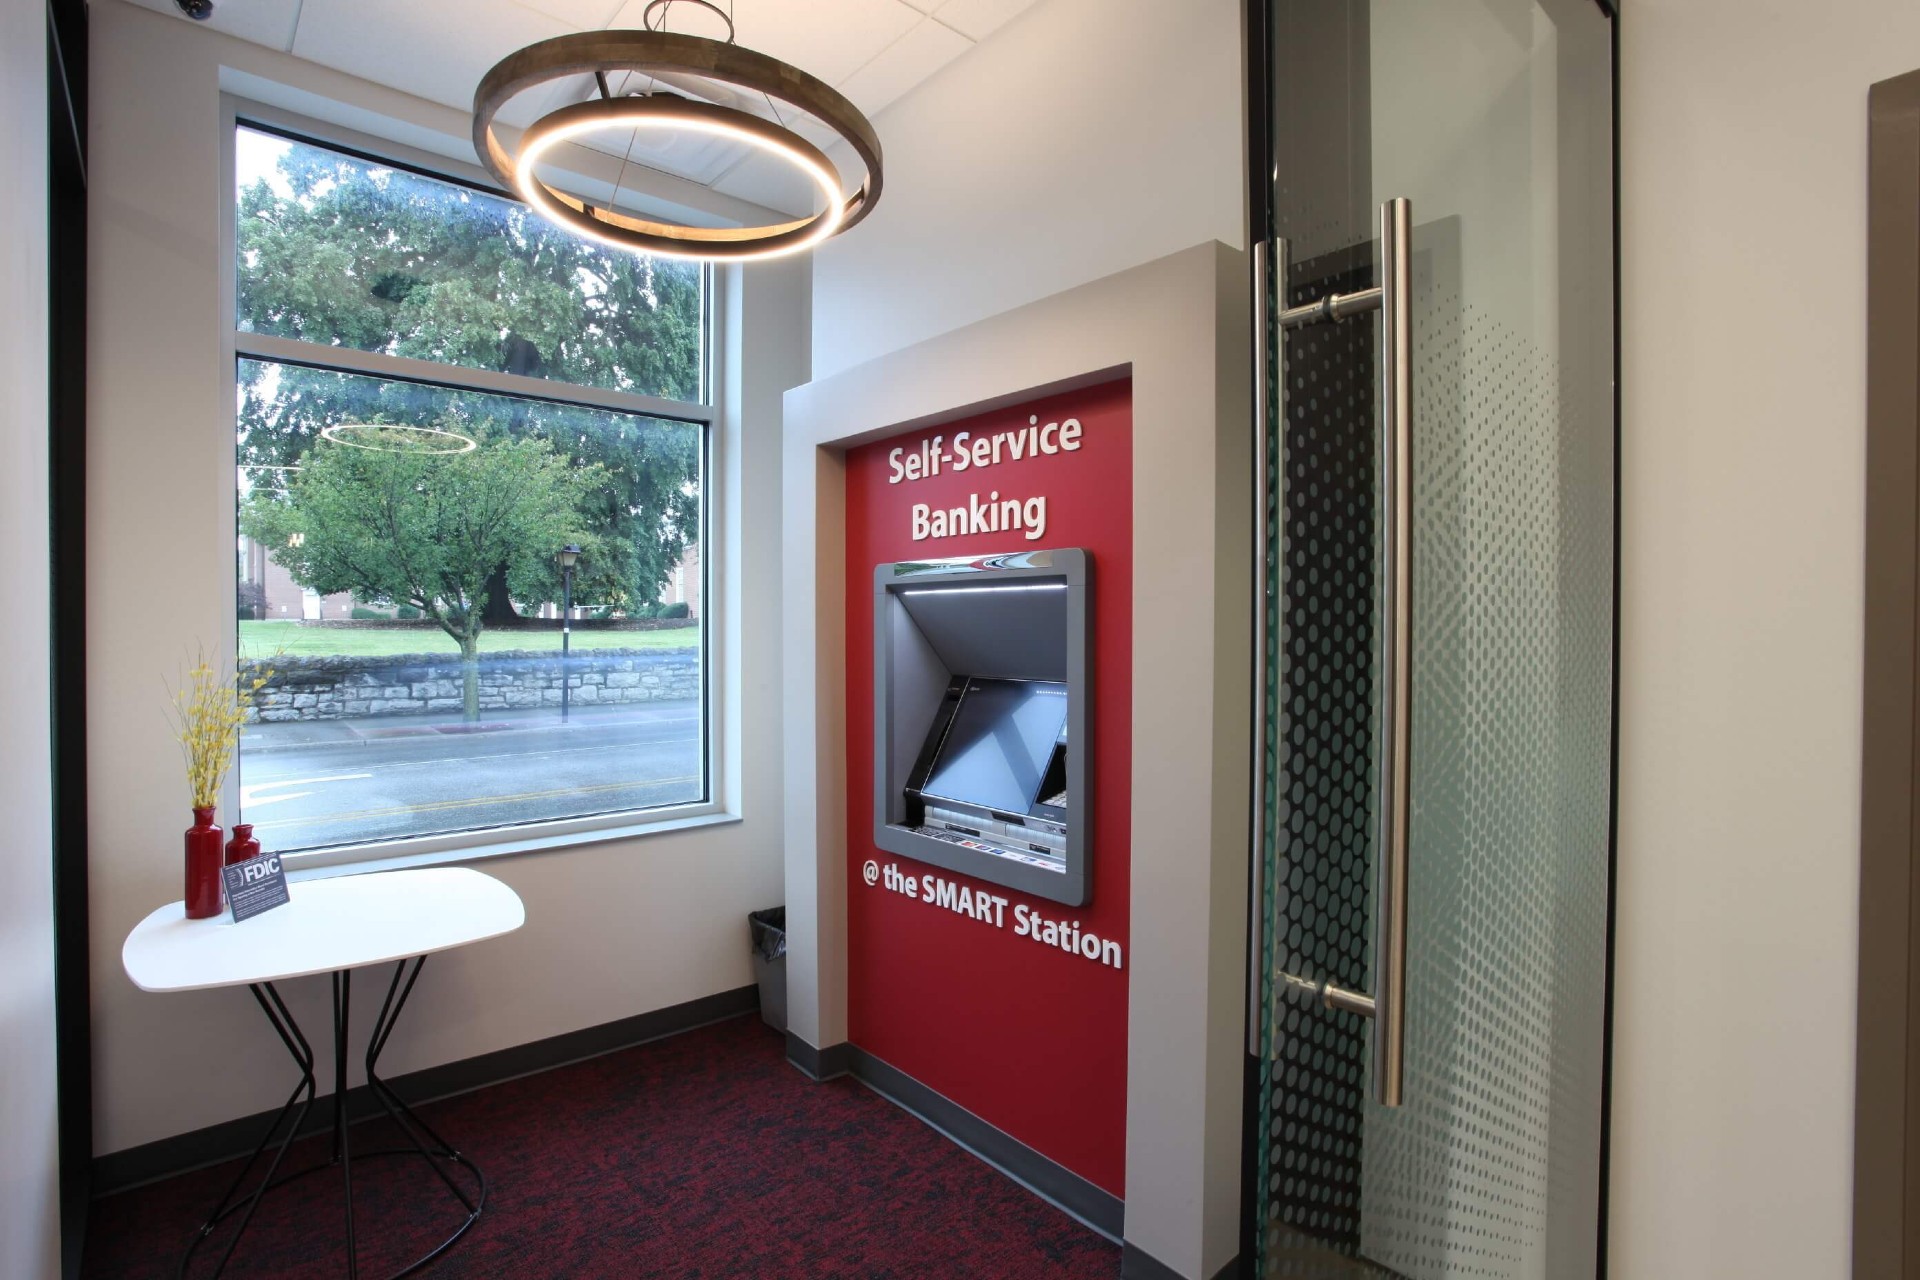 An interactive banking teller machine equipped with a self-service kiosk for customer convenience.